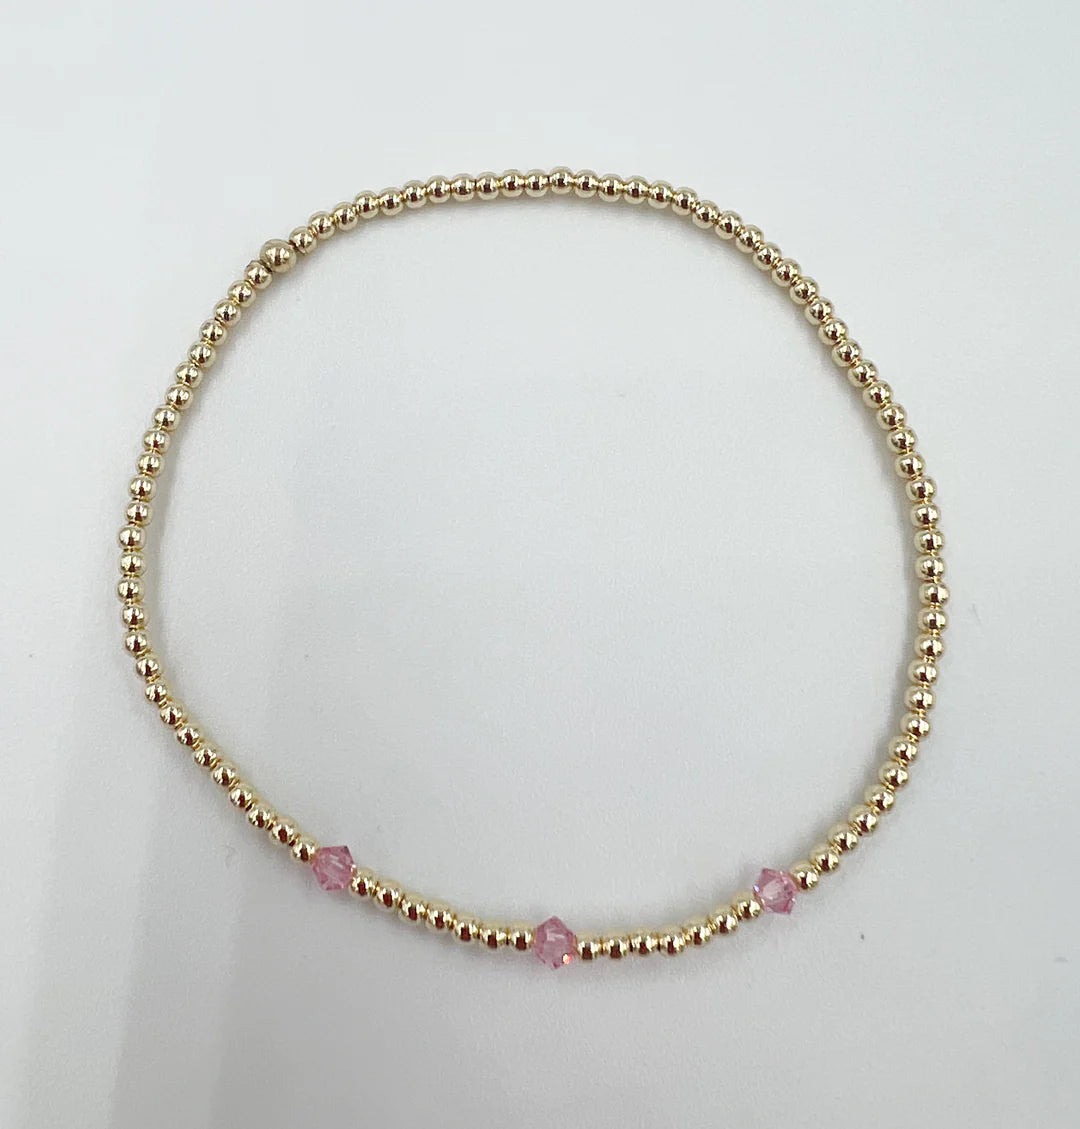 2MM 14K GOLD LEAVE ON WITH PINK CRYSTALS - SASKIA DEVRIES